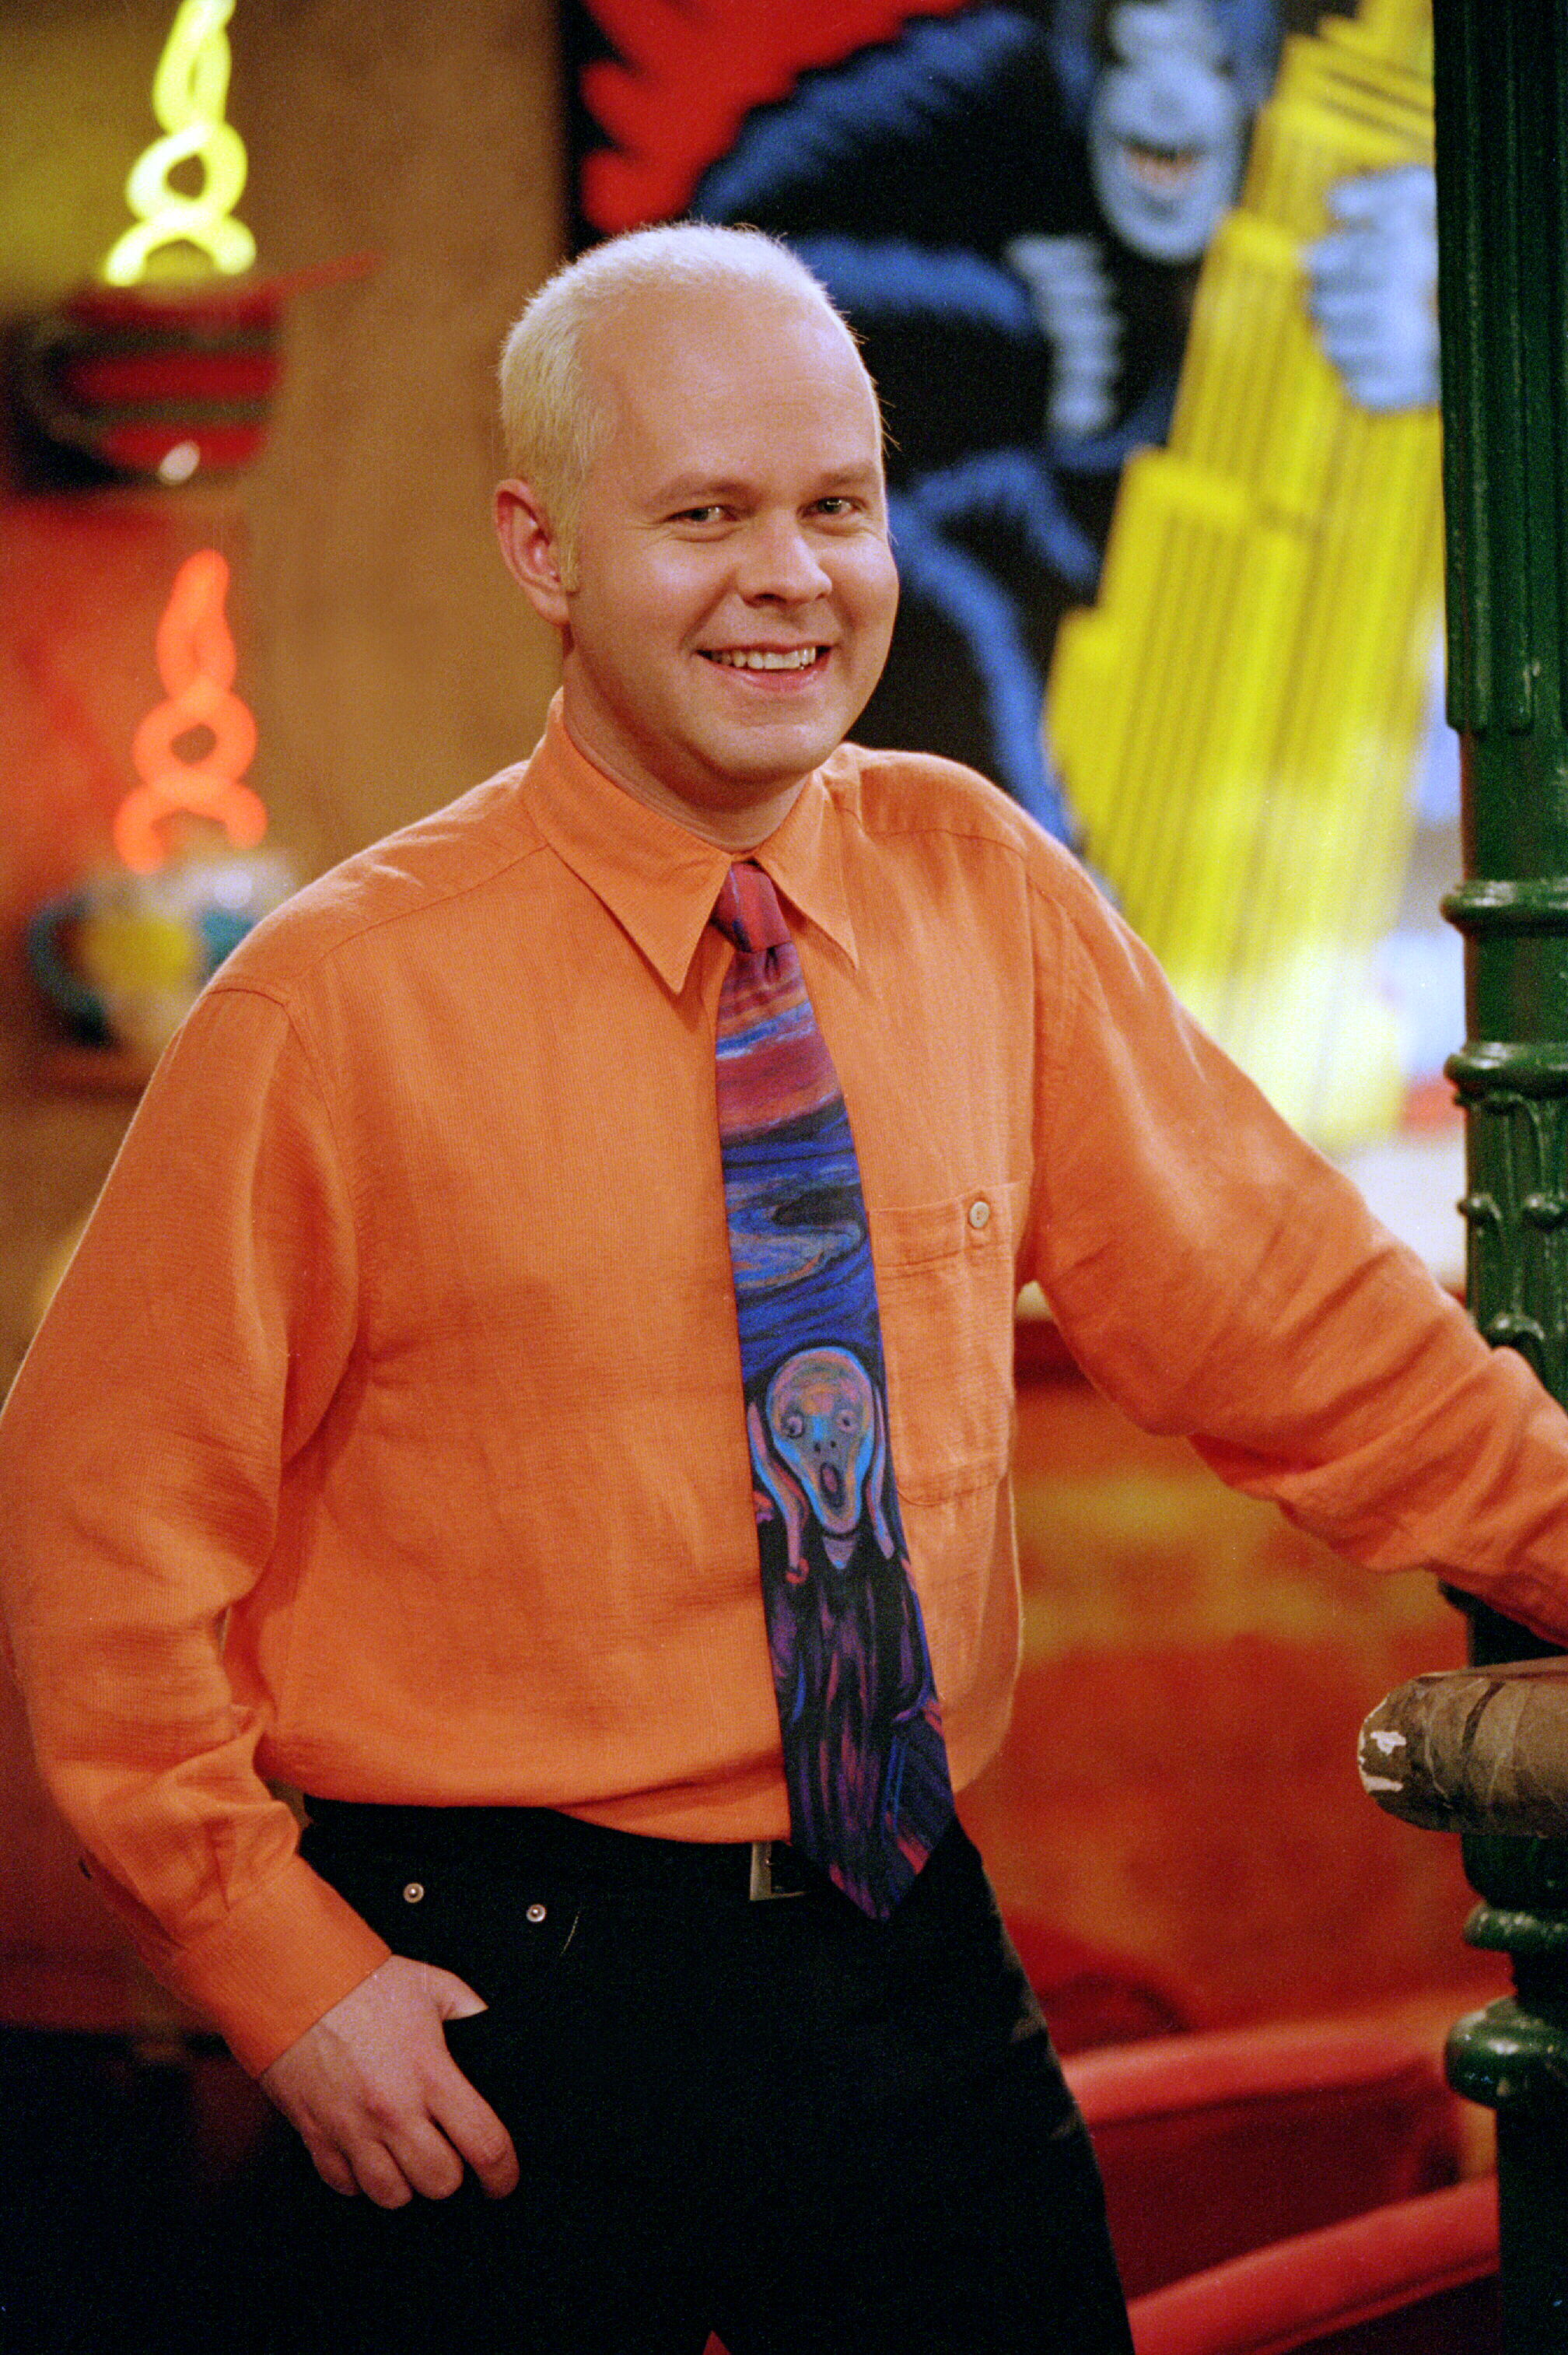 Best Gunther quote? Poll Results - Friends - Fanpop